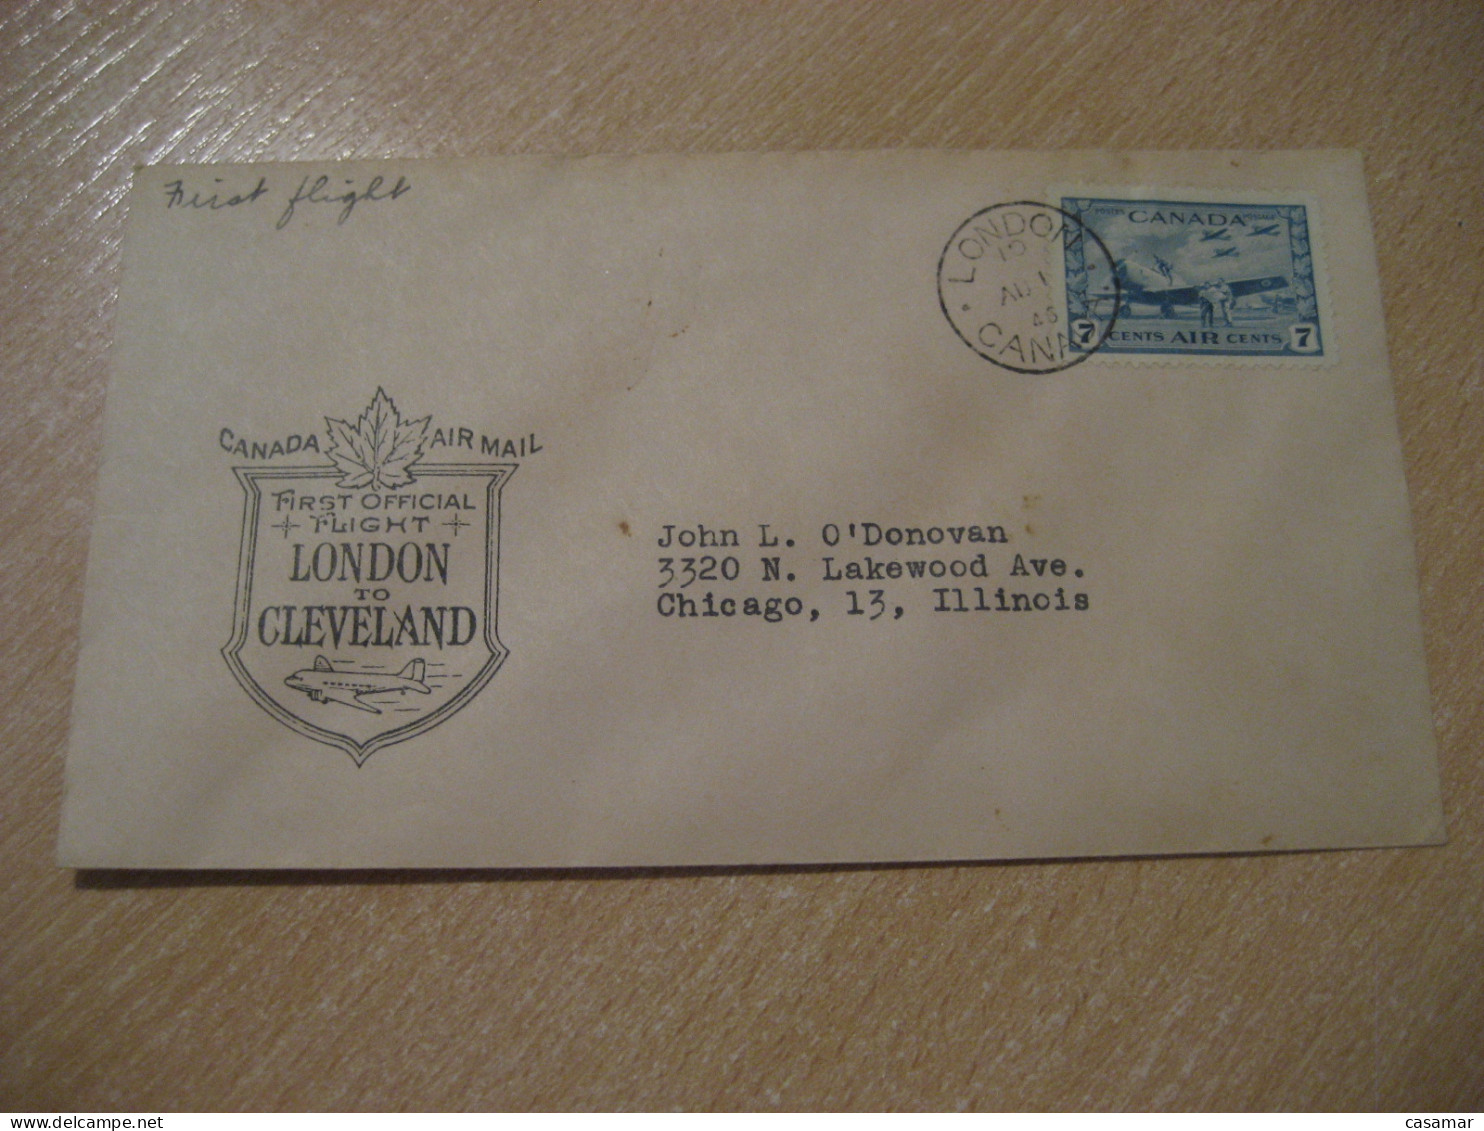 LONDON To CLEVELAND 1946 First Official Flight Air Mail Field Cancel Cover CANADA England - Premiers Vols